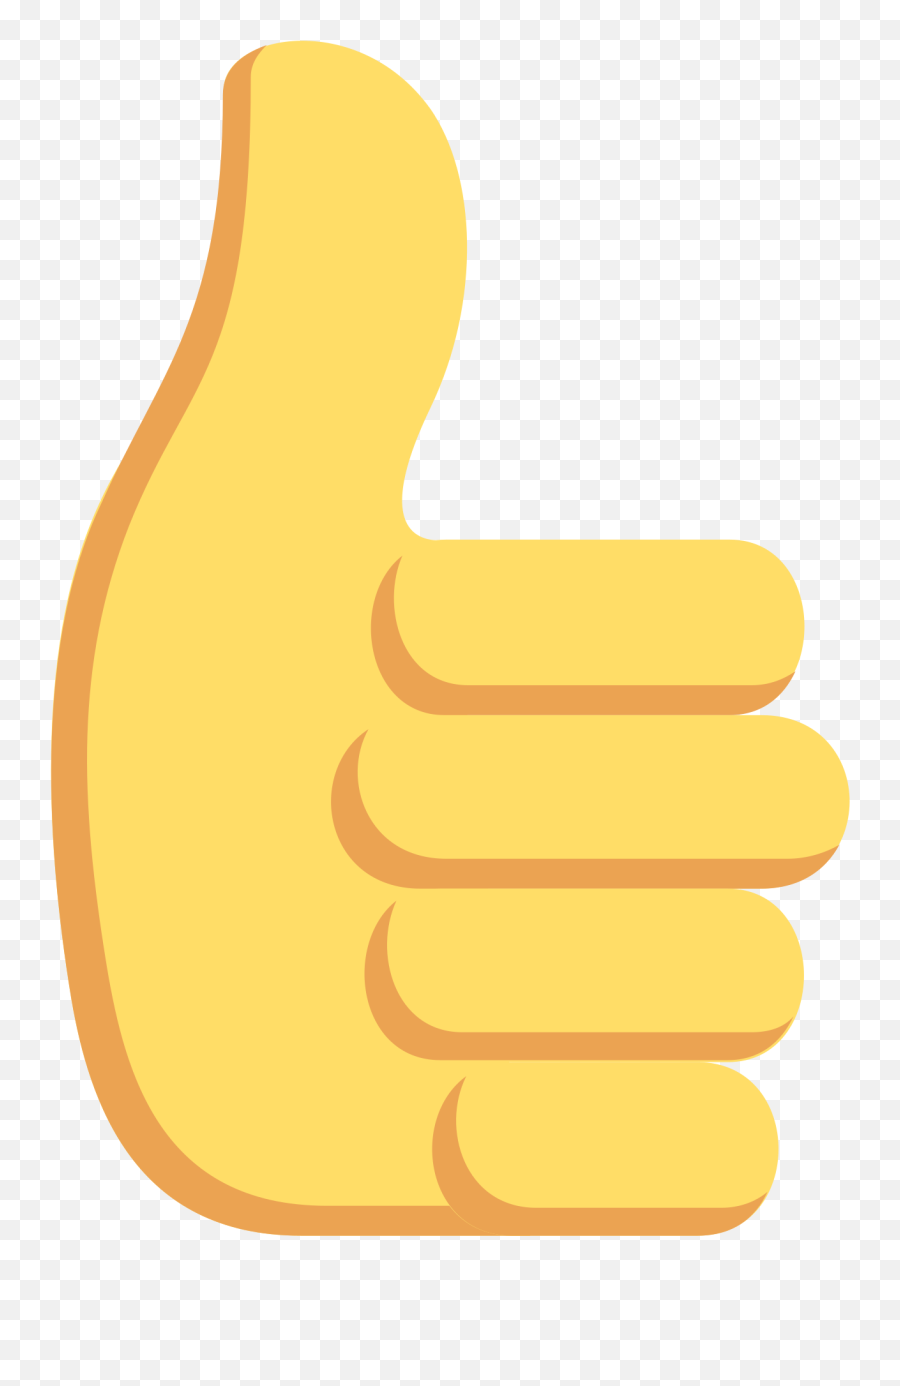 Thumbs Up Emoji Clipart Free Download Transparent Png - Icon,Wink Thumbs Up Emoticon